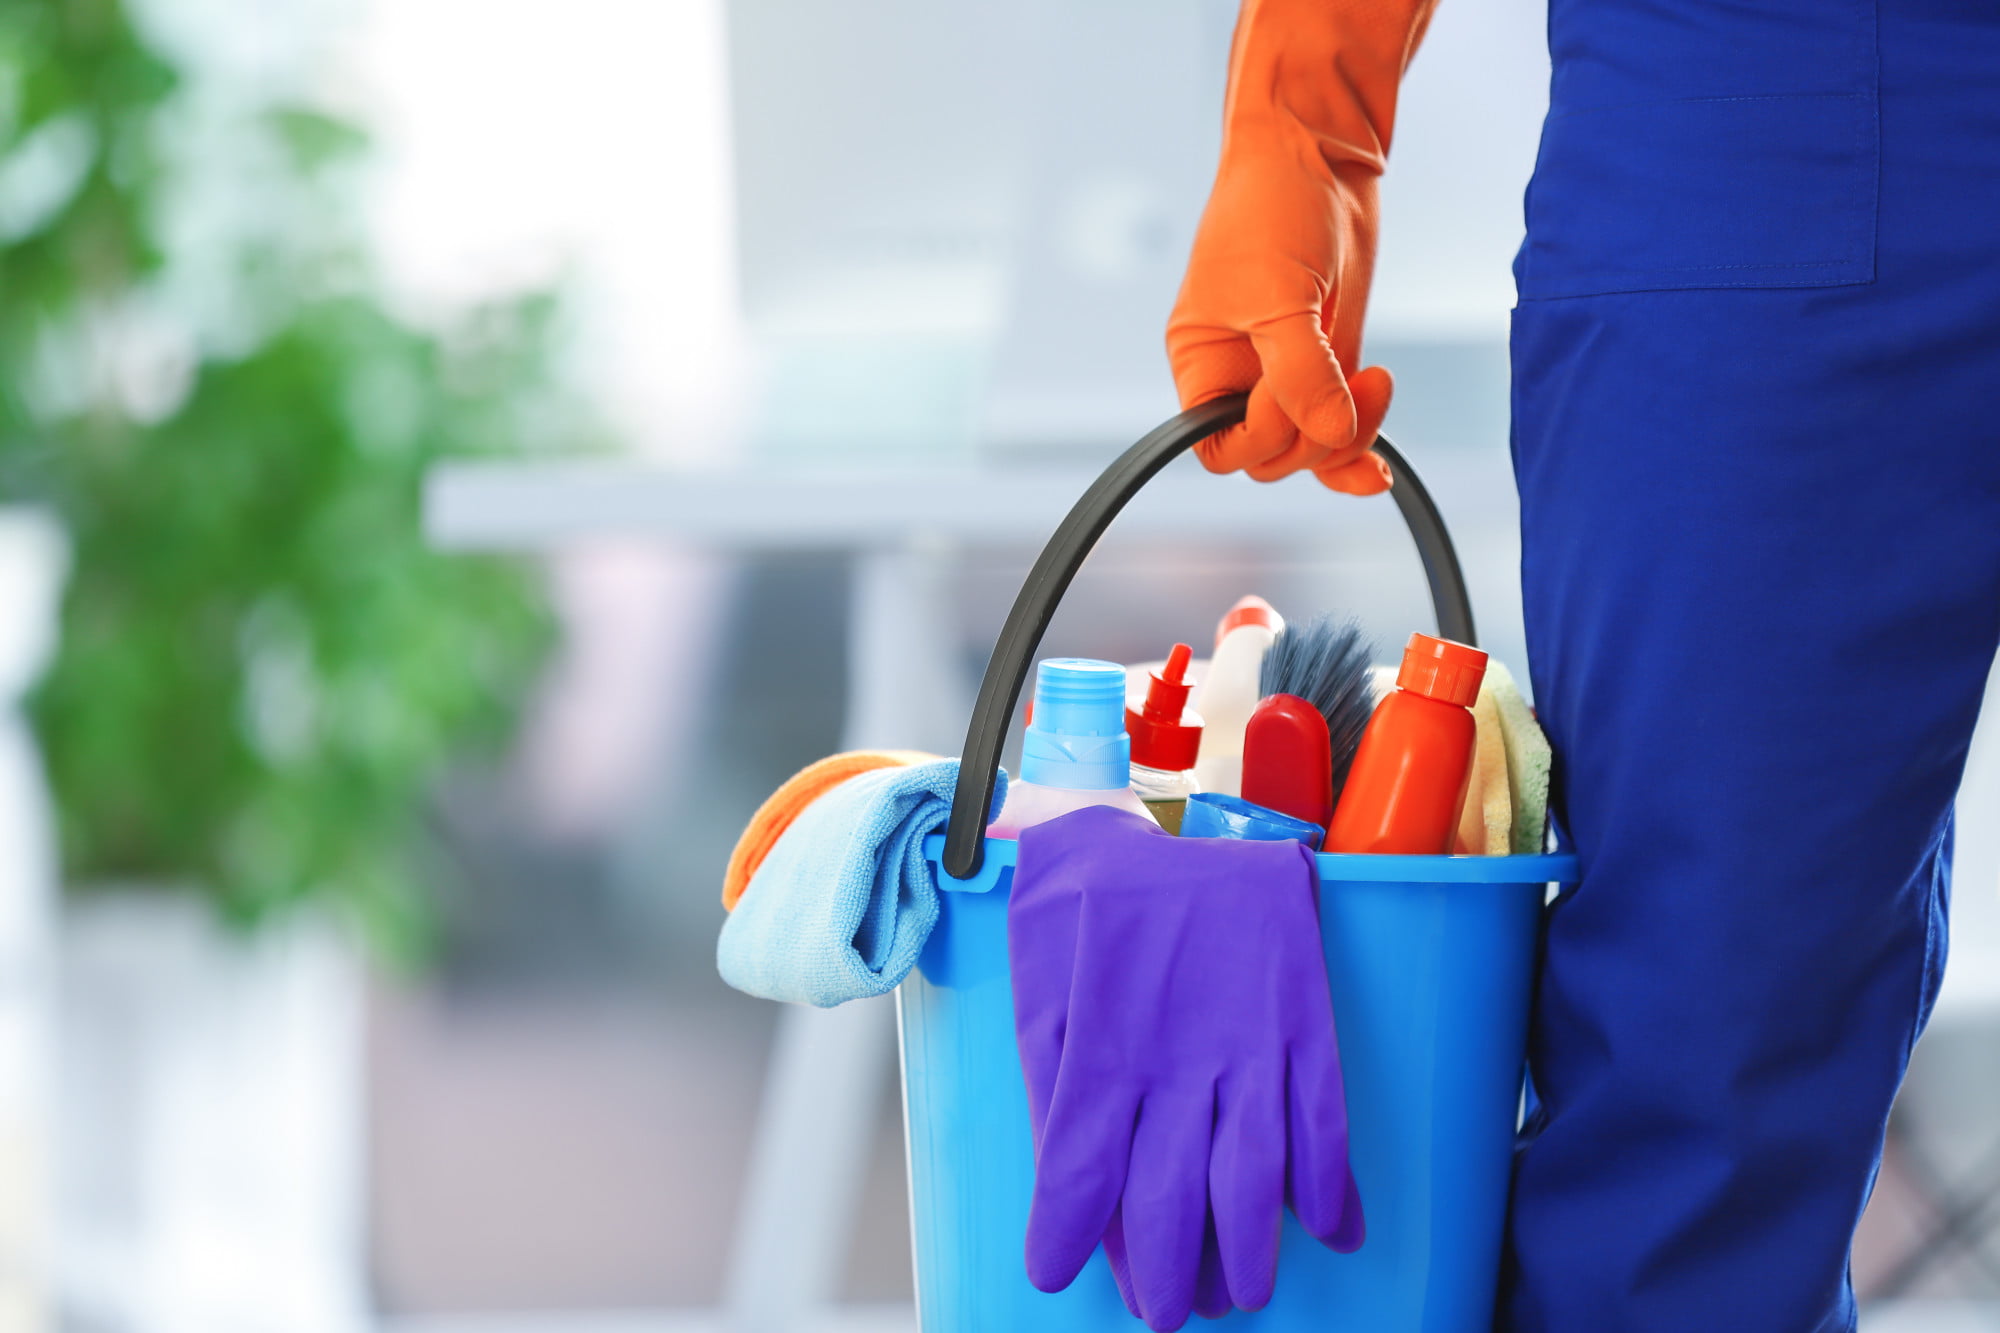 When it comes to maintaining your home or office, exterior cleaning services are a great way to maintain your space. Here are a few benefits you should know.